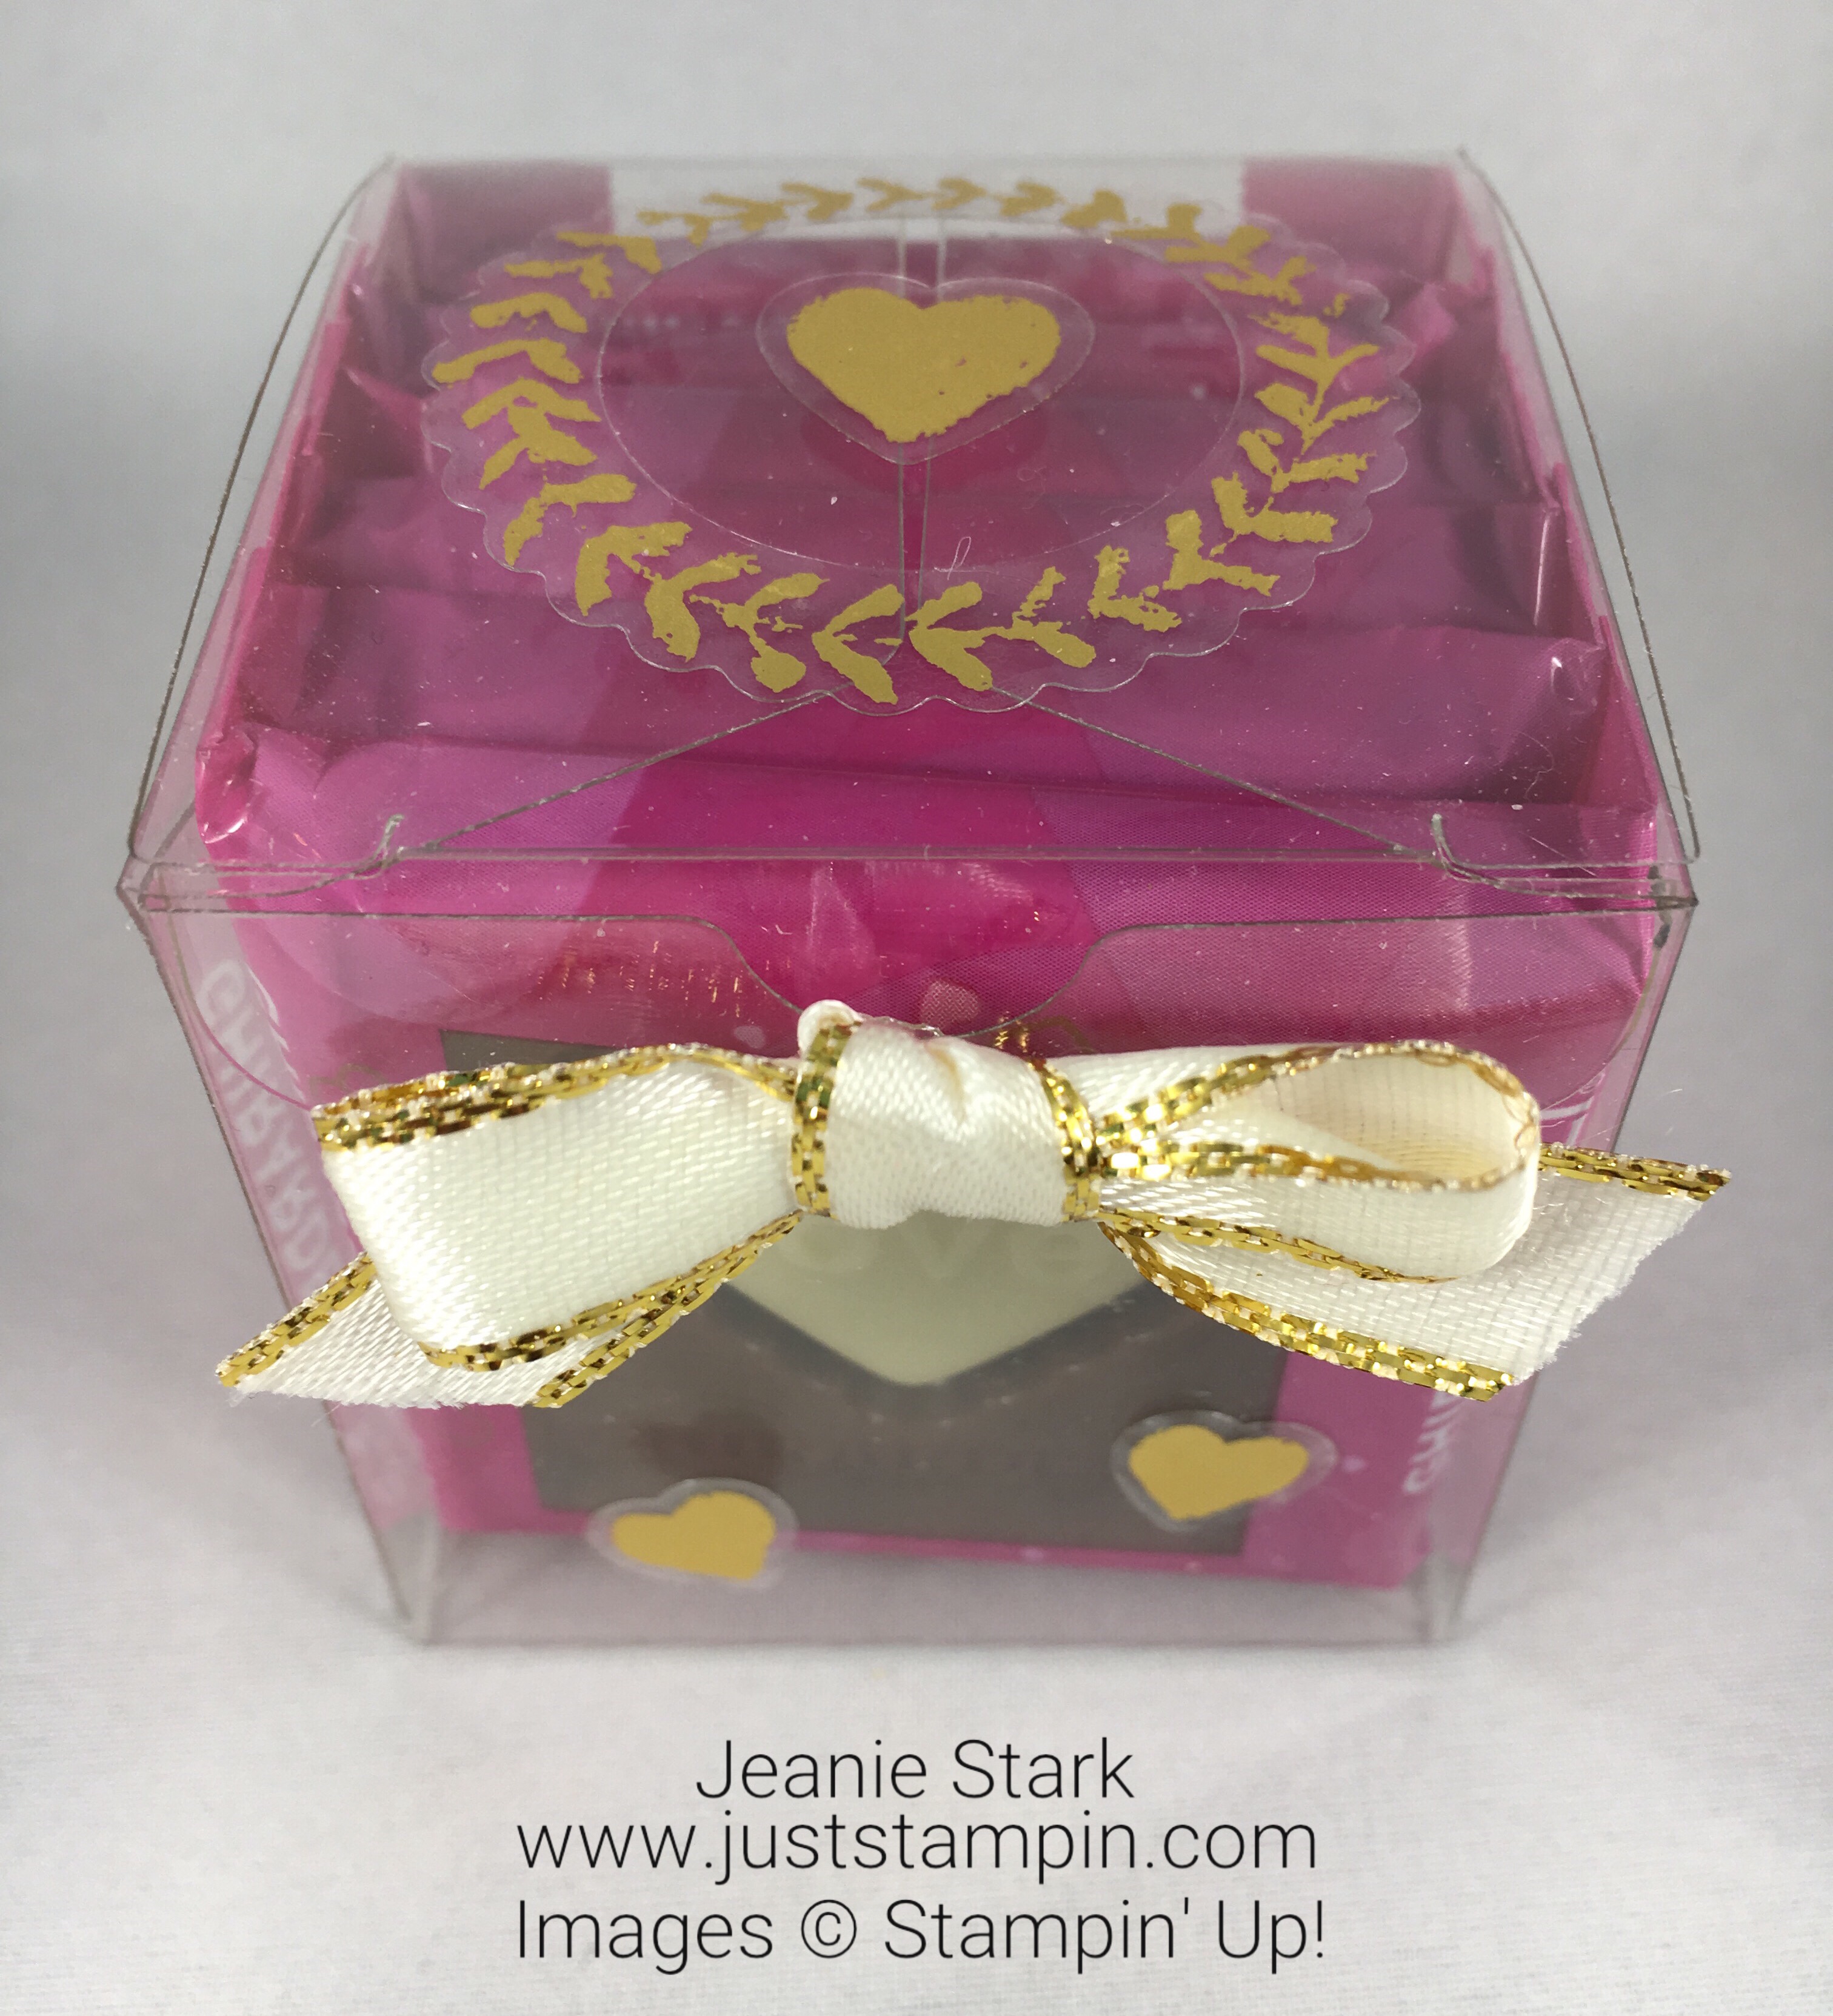 Stampin Up Clear Tiny Treat Box with Painted Love Gold Vinyl Stickers and Ghirardelli Chocolate - Jeanie Stark StampinUp